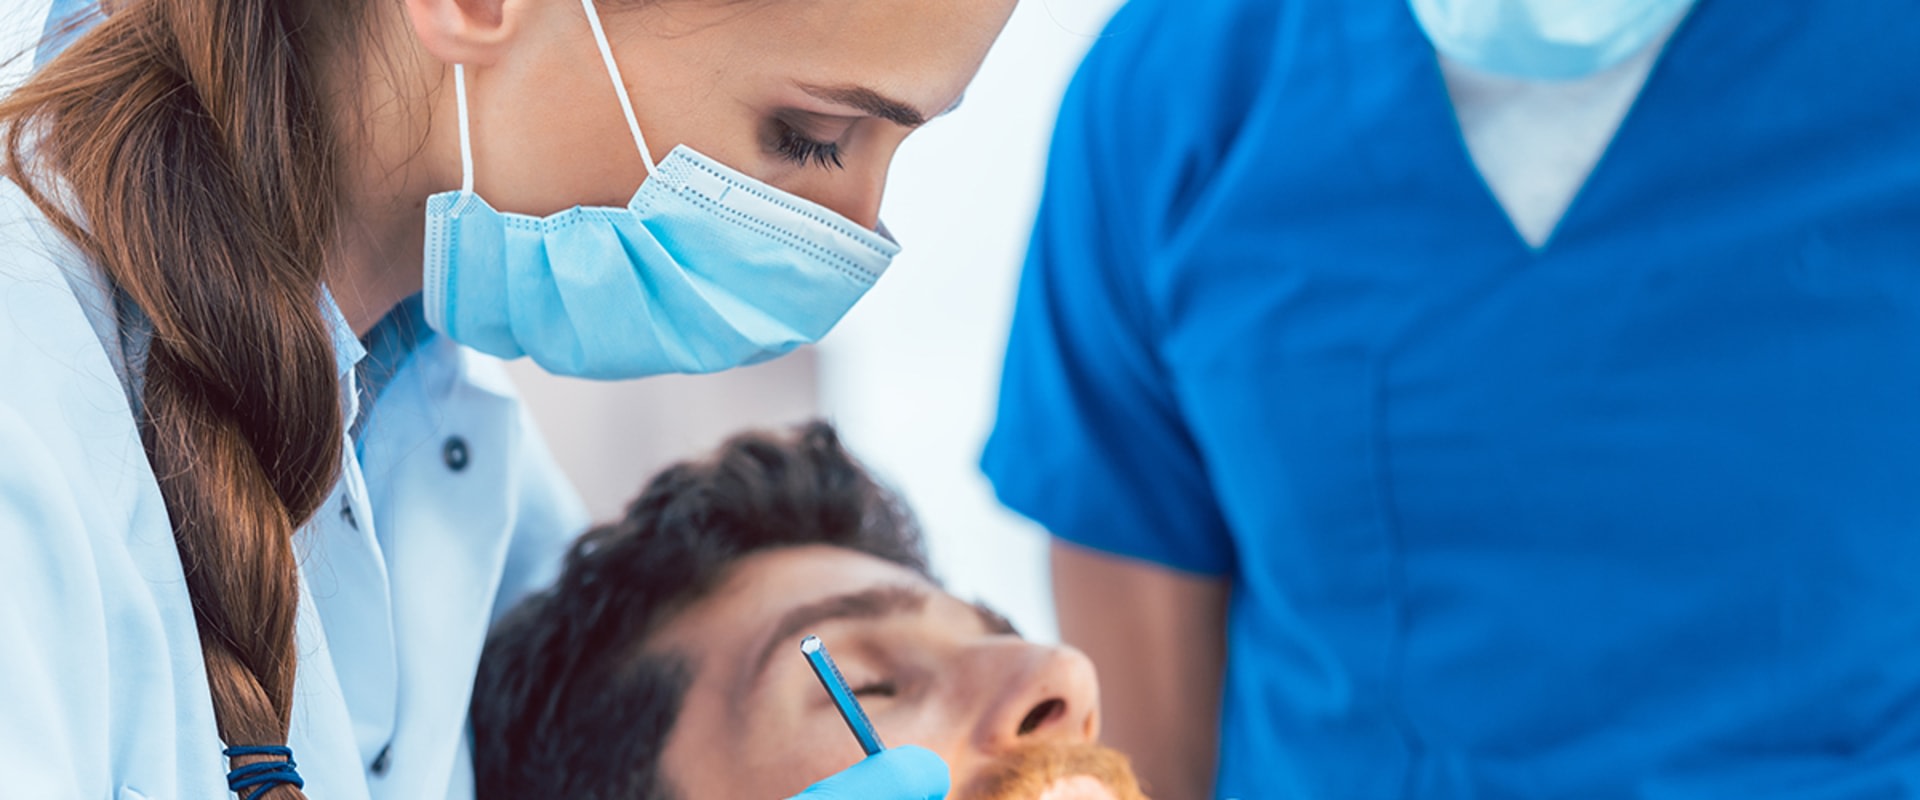 Navigating Dental Emergencies: General Dentistry In Rockville Comes To The Rescue